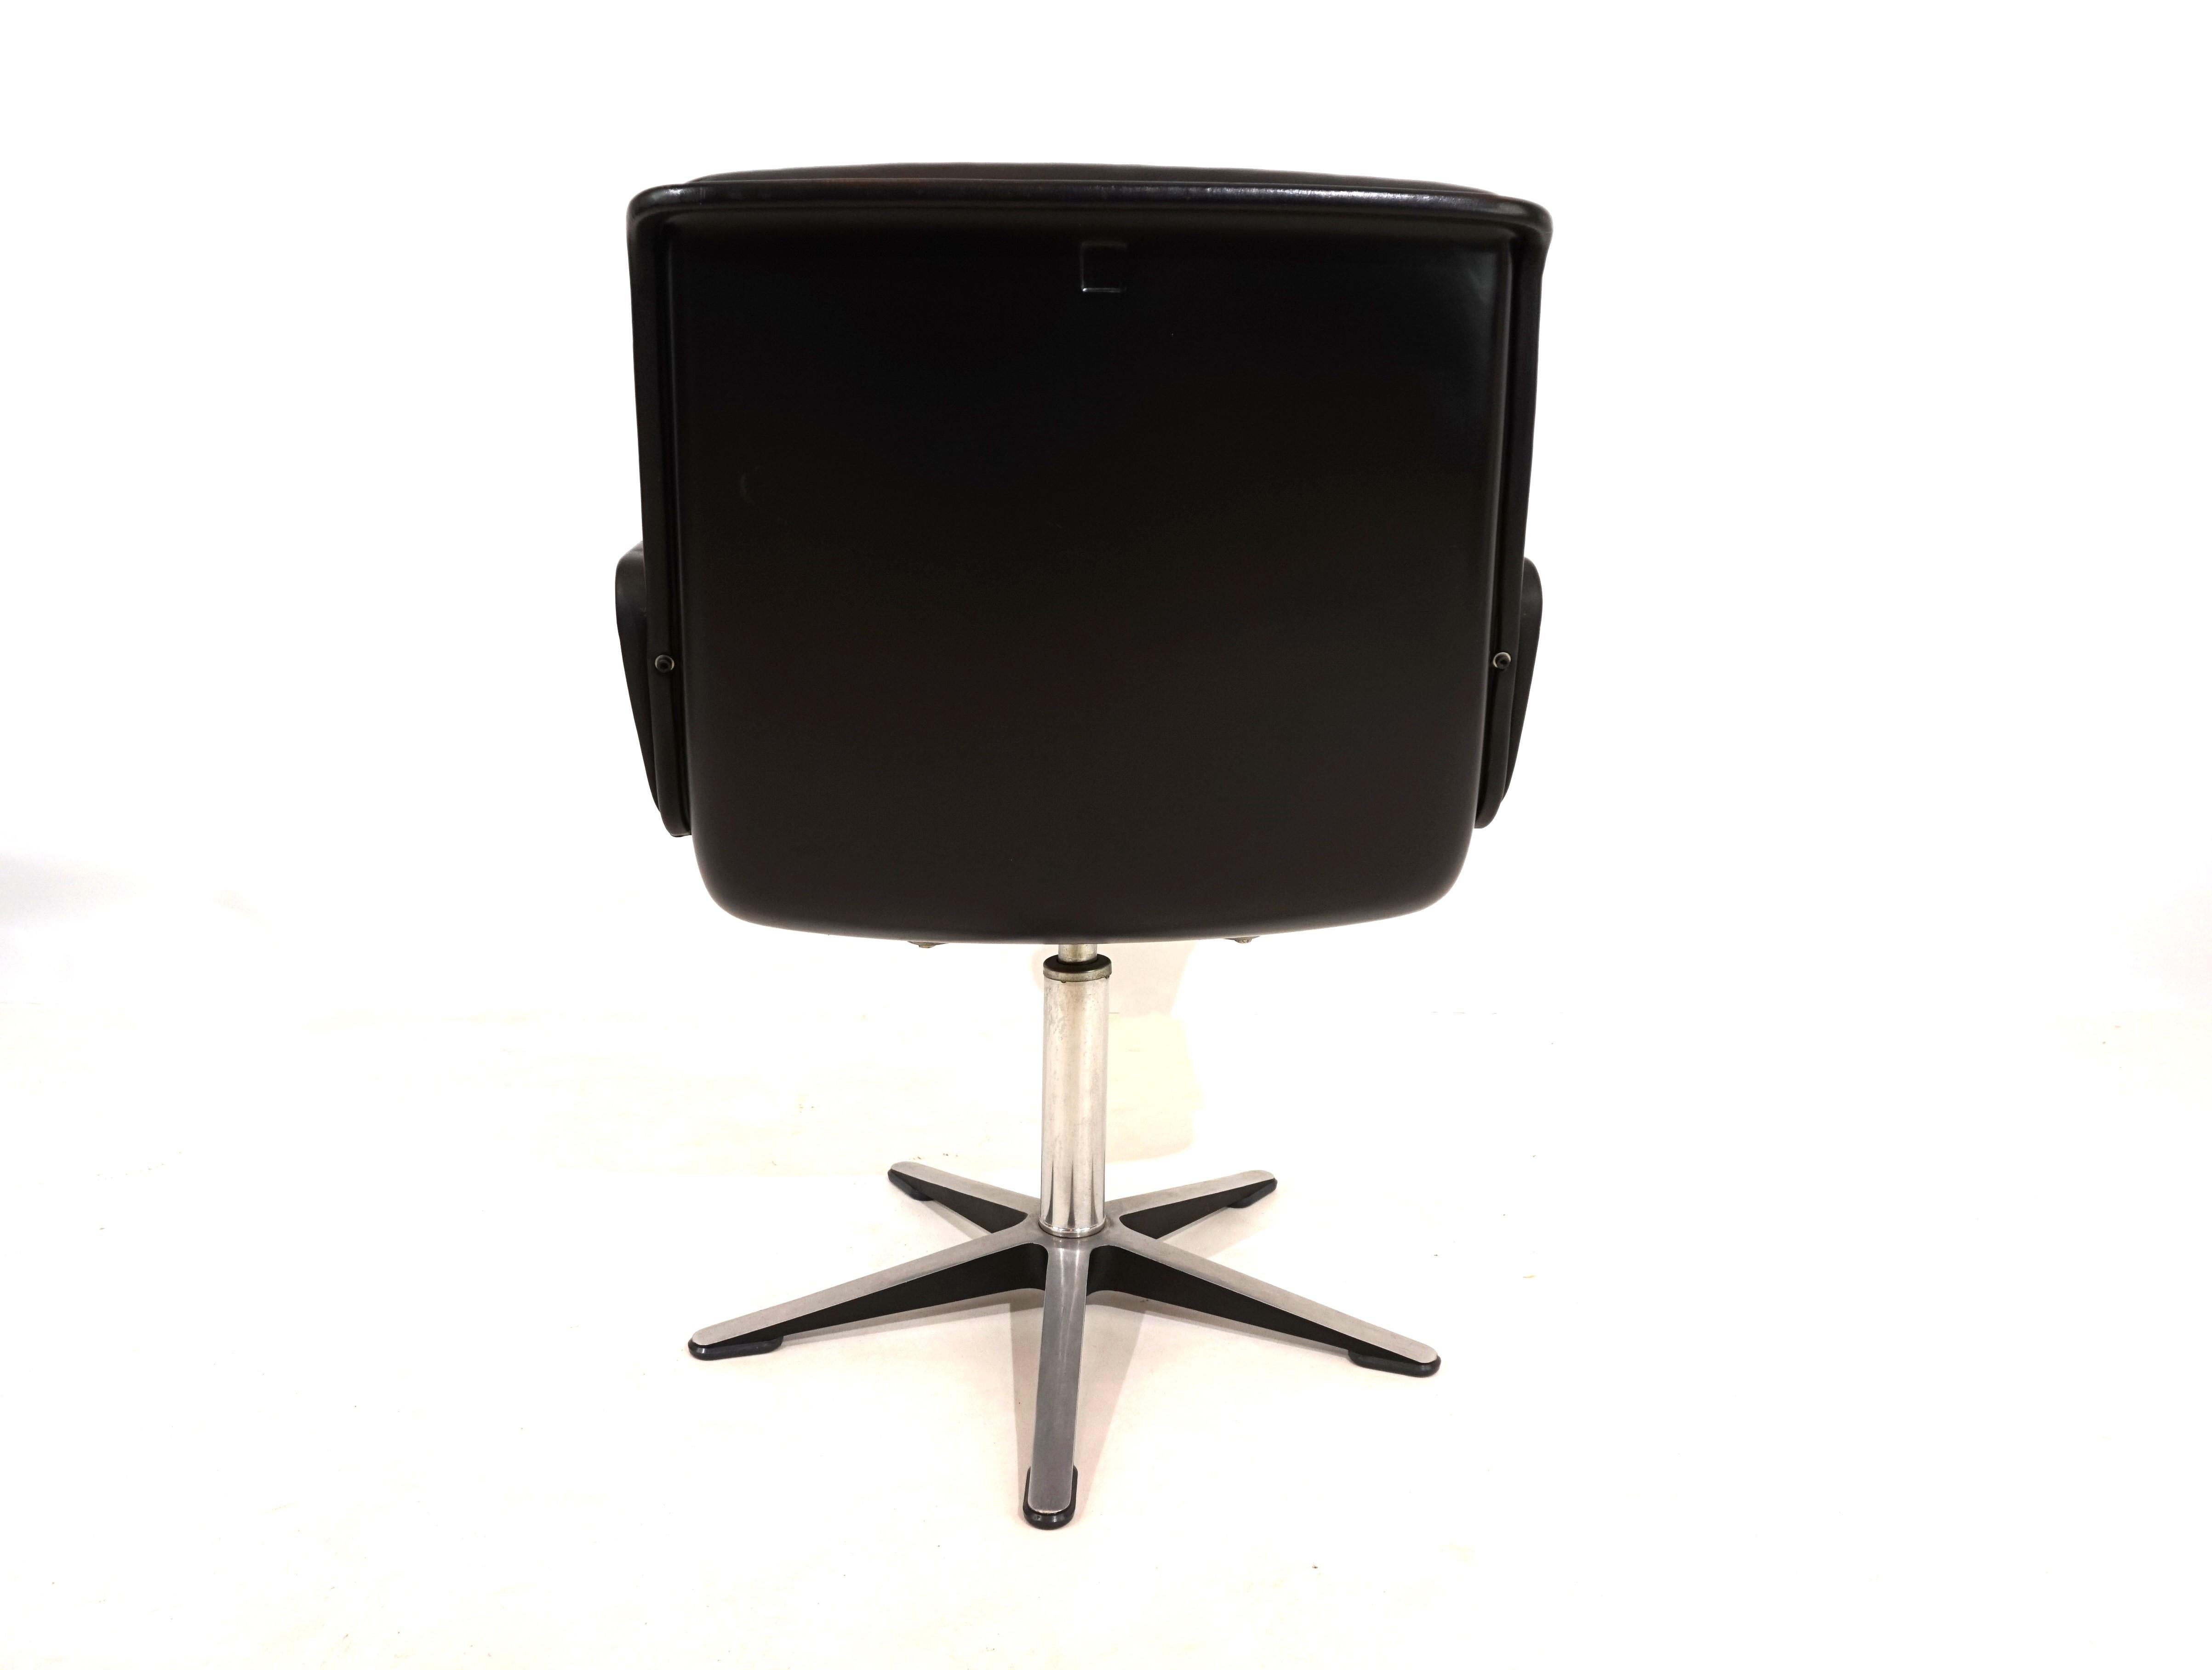 German Wilkhahn Delta leather dining/conference chair from Delta Design